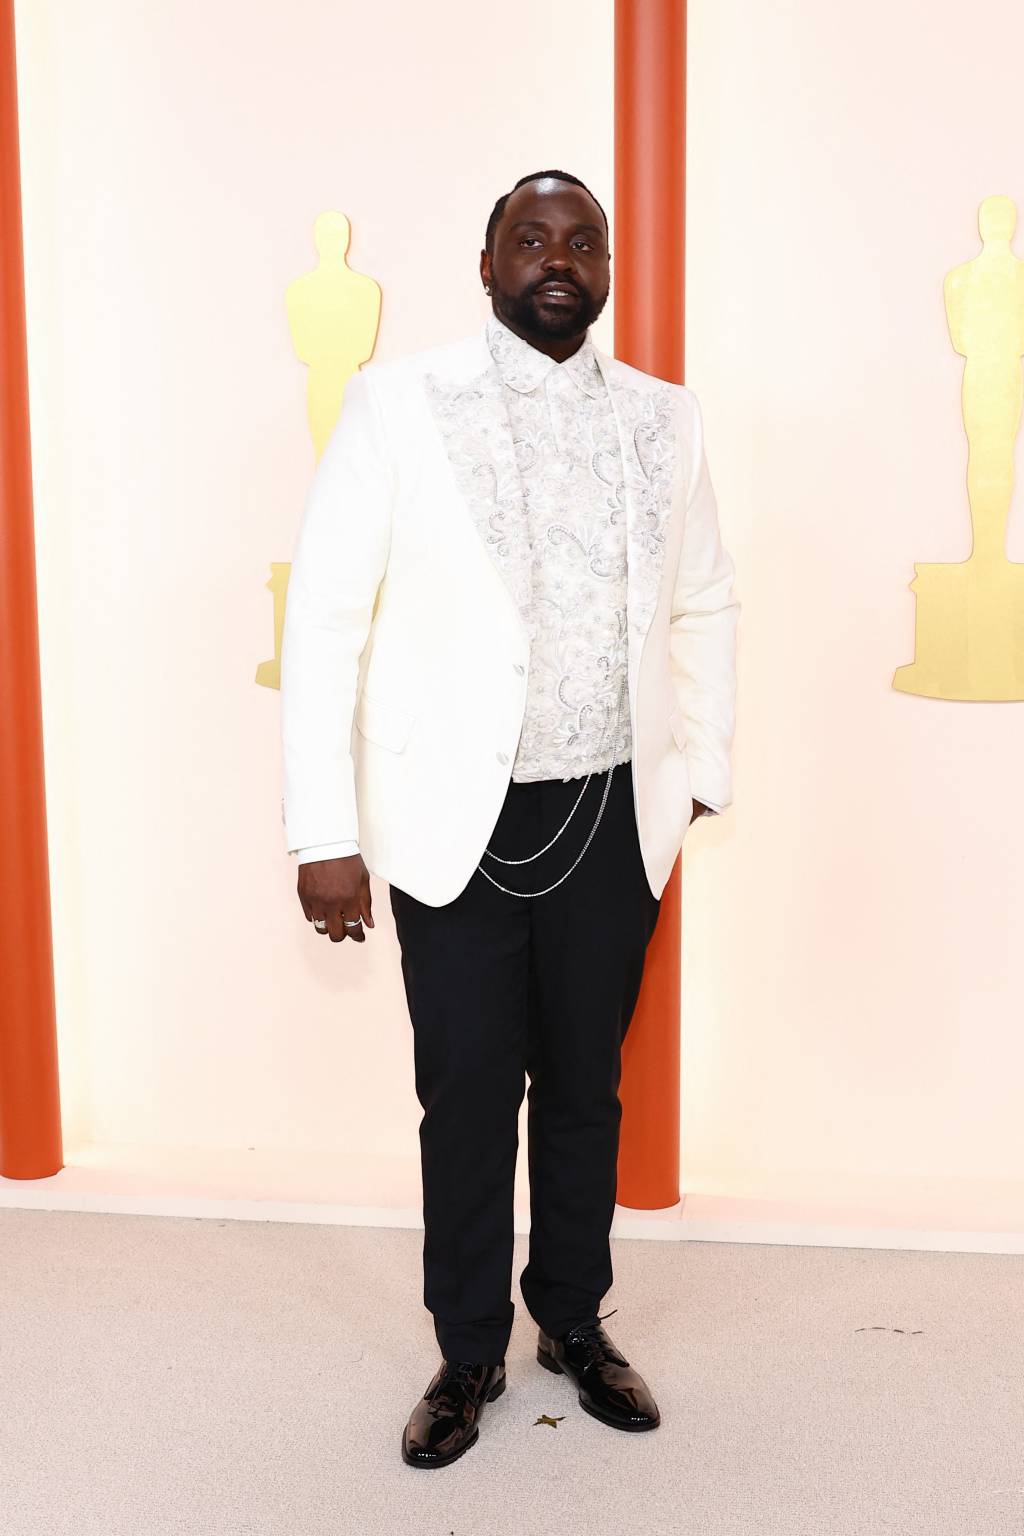 HOLLYWOOD, CALIFORNIA - MARCH 12: Brian Tyree Henry attends the 95th Annual Academy Awards on March 12, 2023 in Hollywood, California. Arturo Holmes/Getty Images /AFP (Photo by Arturo Holmes / GETTY IMAGES NORTH AMERICA / Getty Images via AFP)